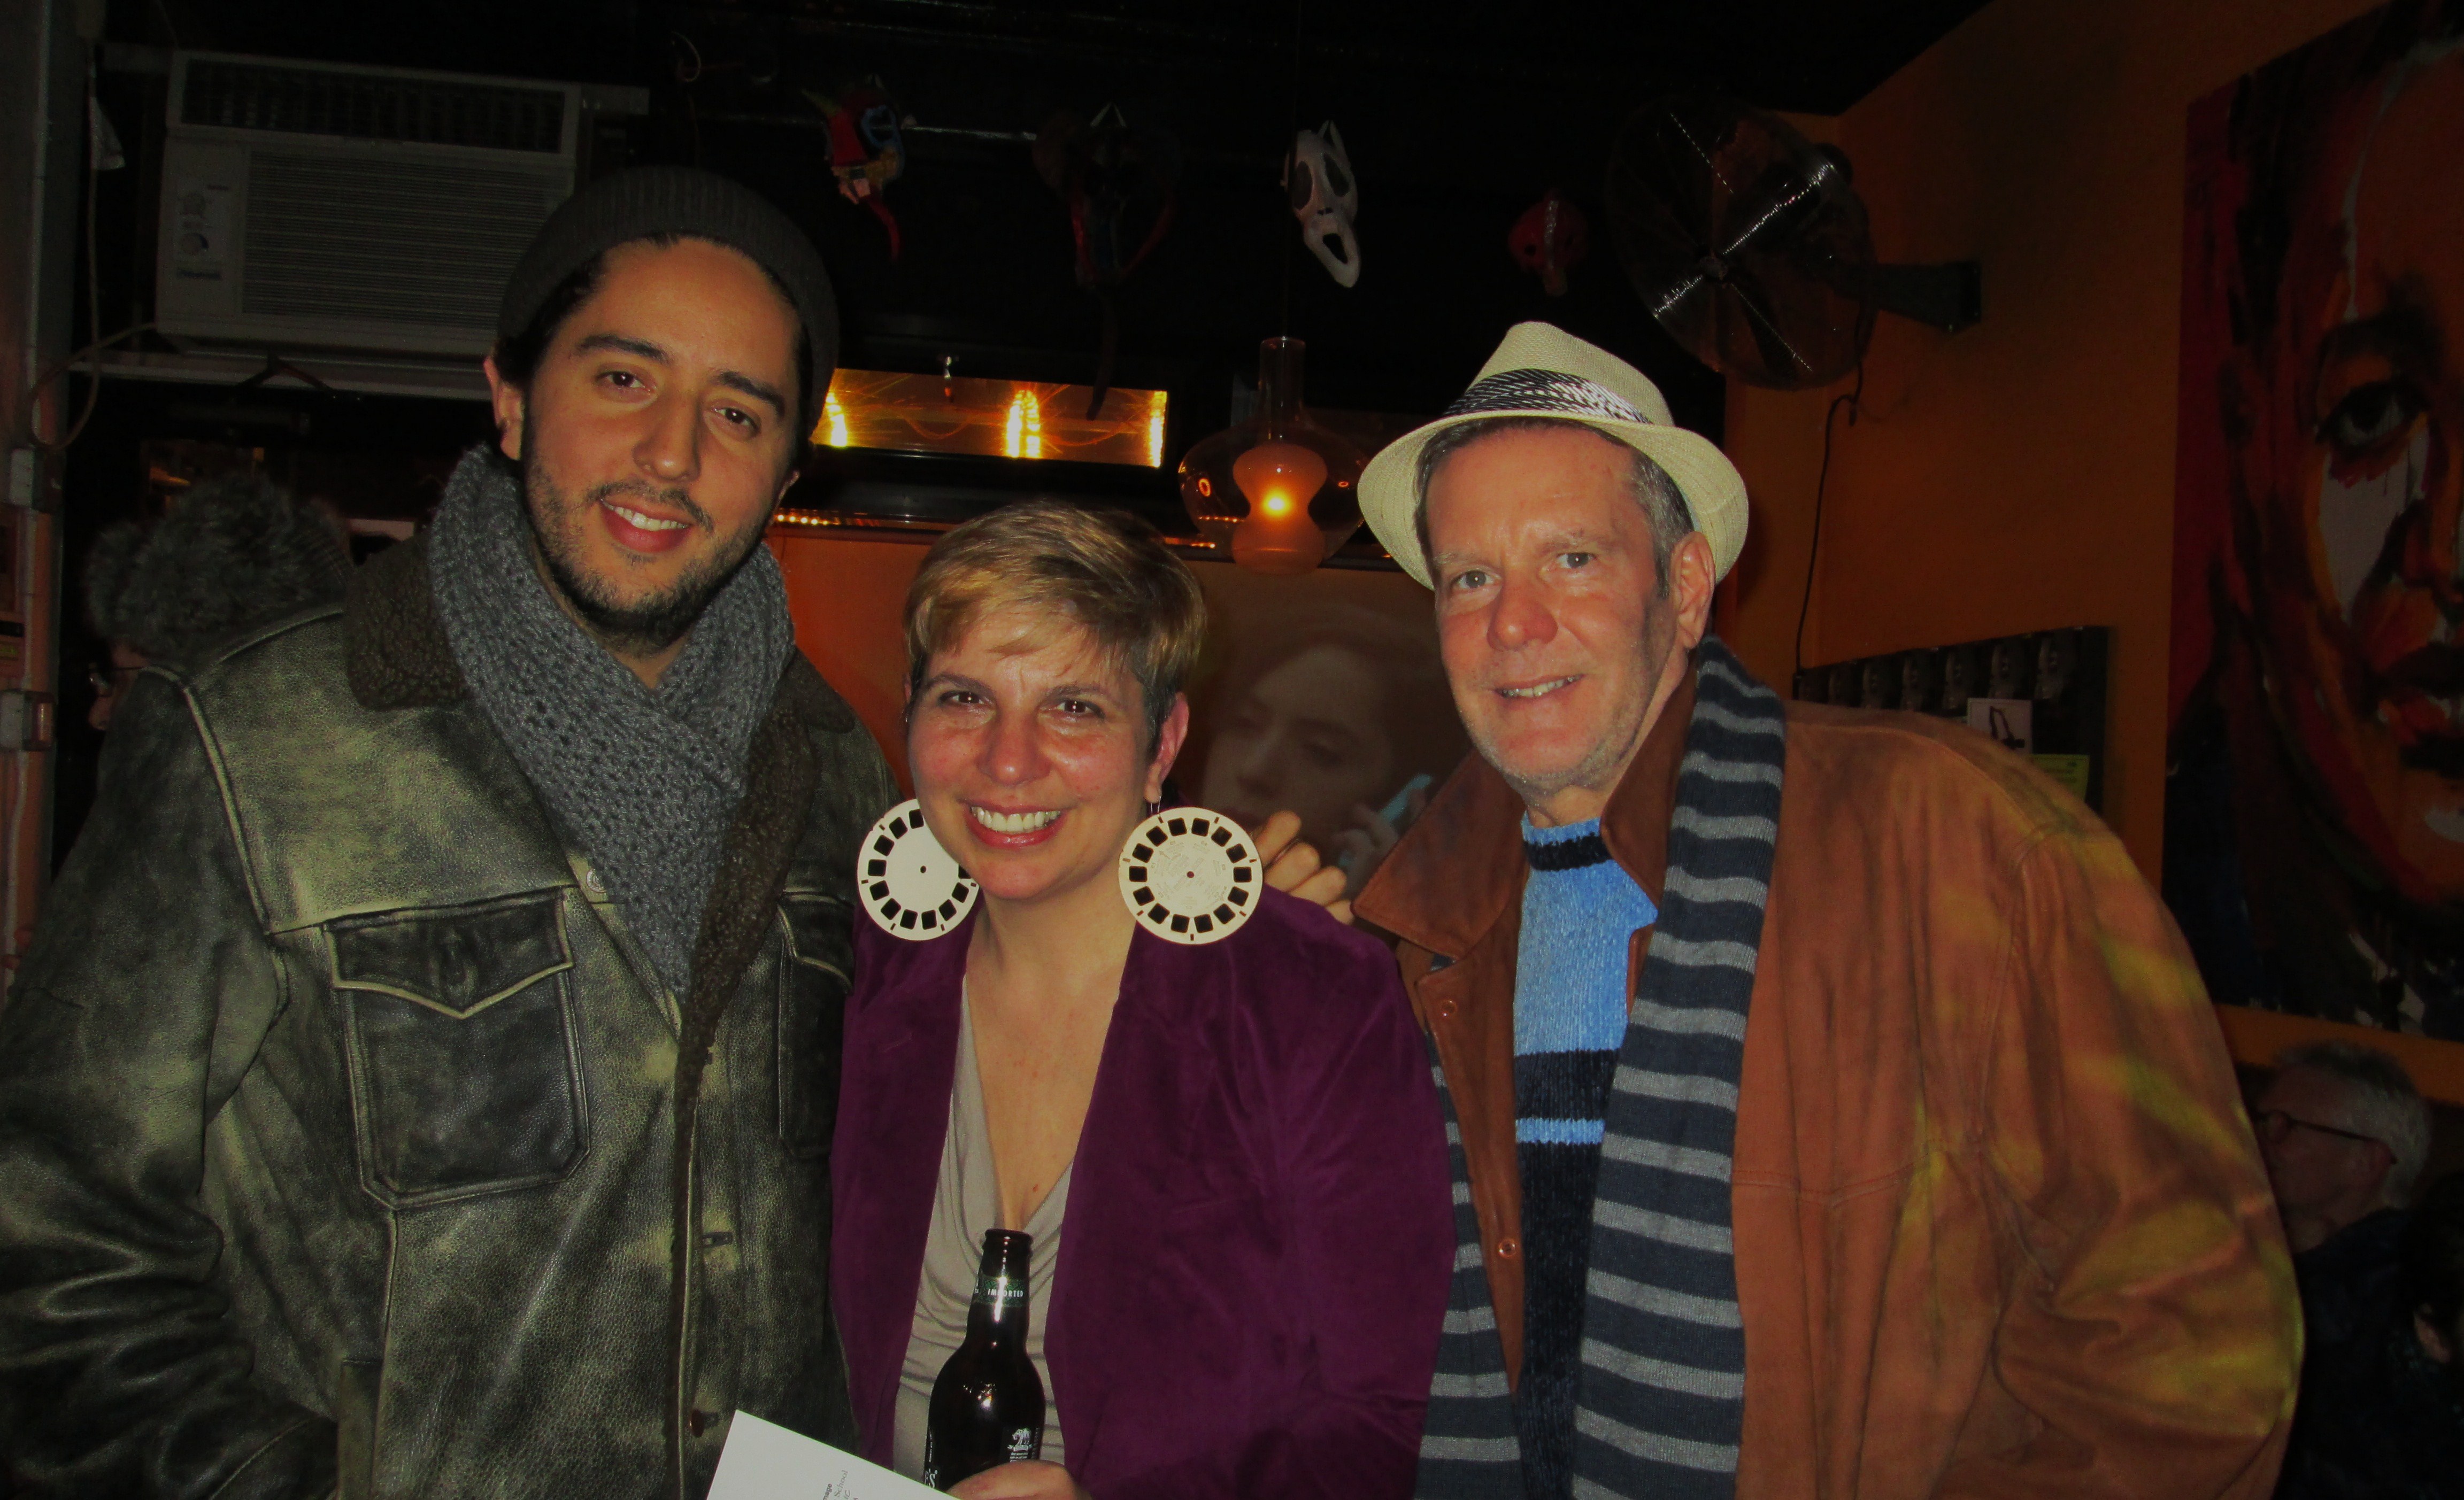 Queens World Film Festival Movie Trailer Party. Jackson Heights filmmakers Adrian Manzano, Celeste Balducci and Paul Kelly--March 3, 2013.